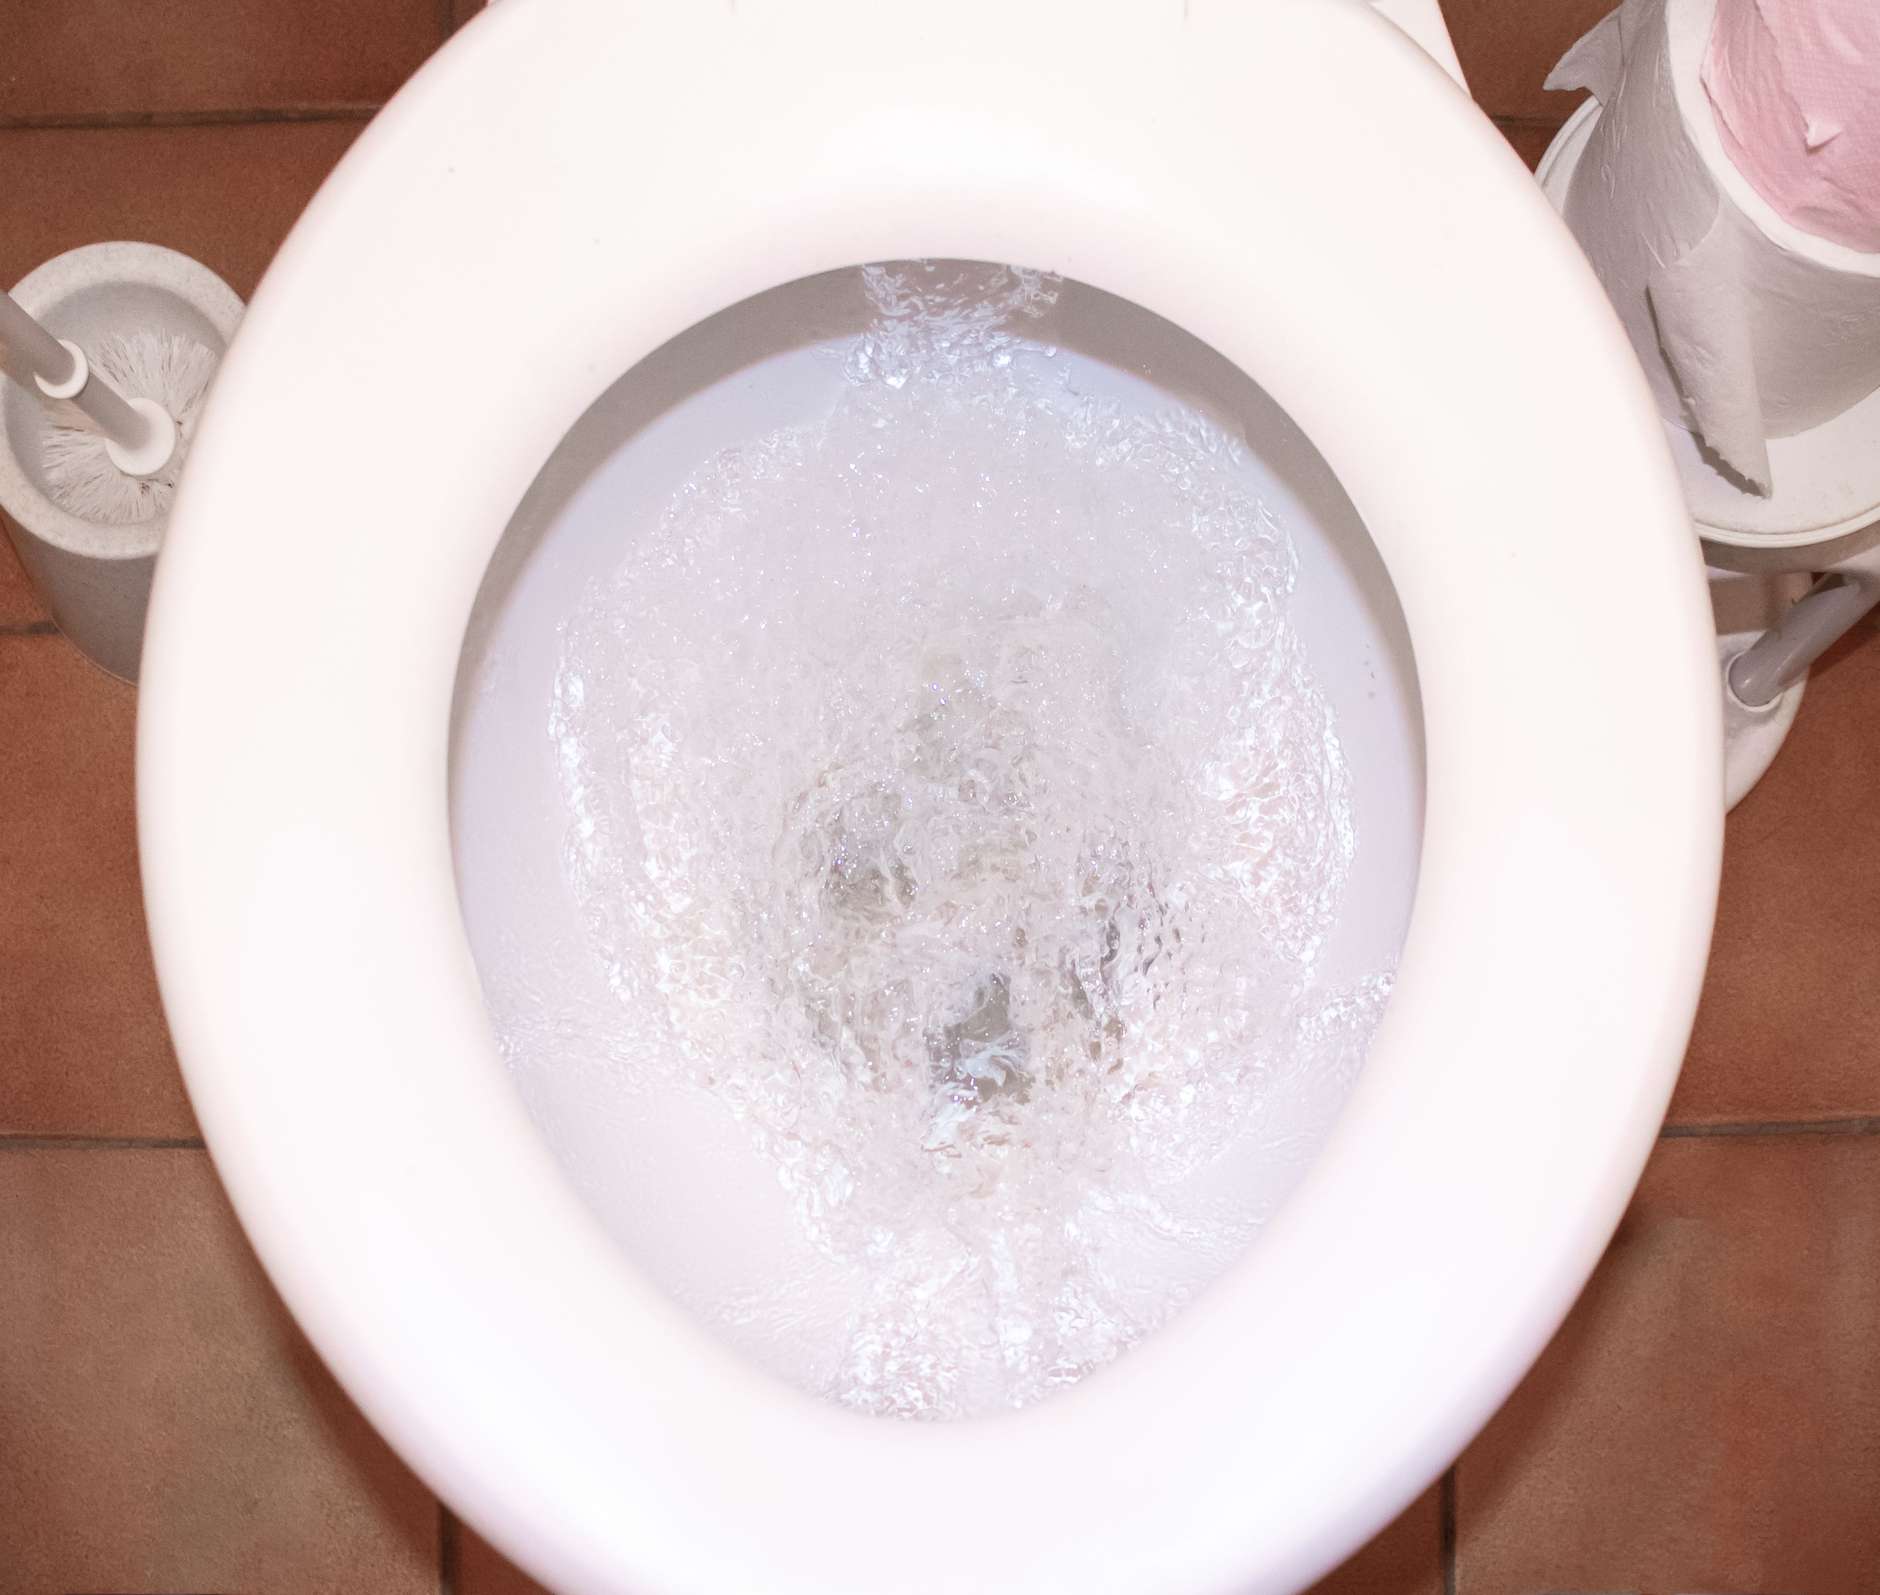 What Causes Water In Toilet Bowl To Move